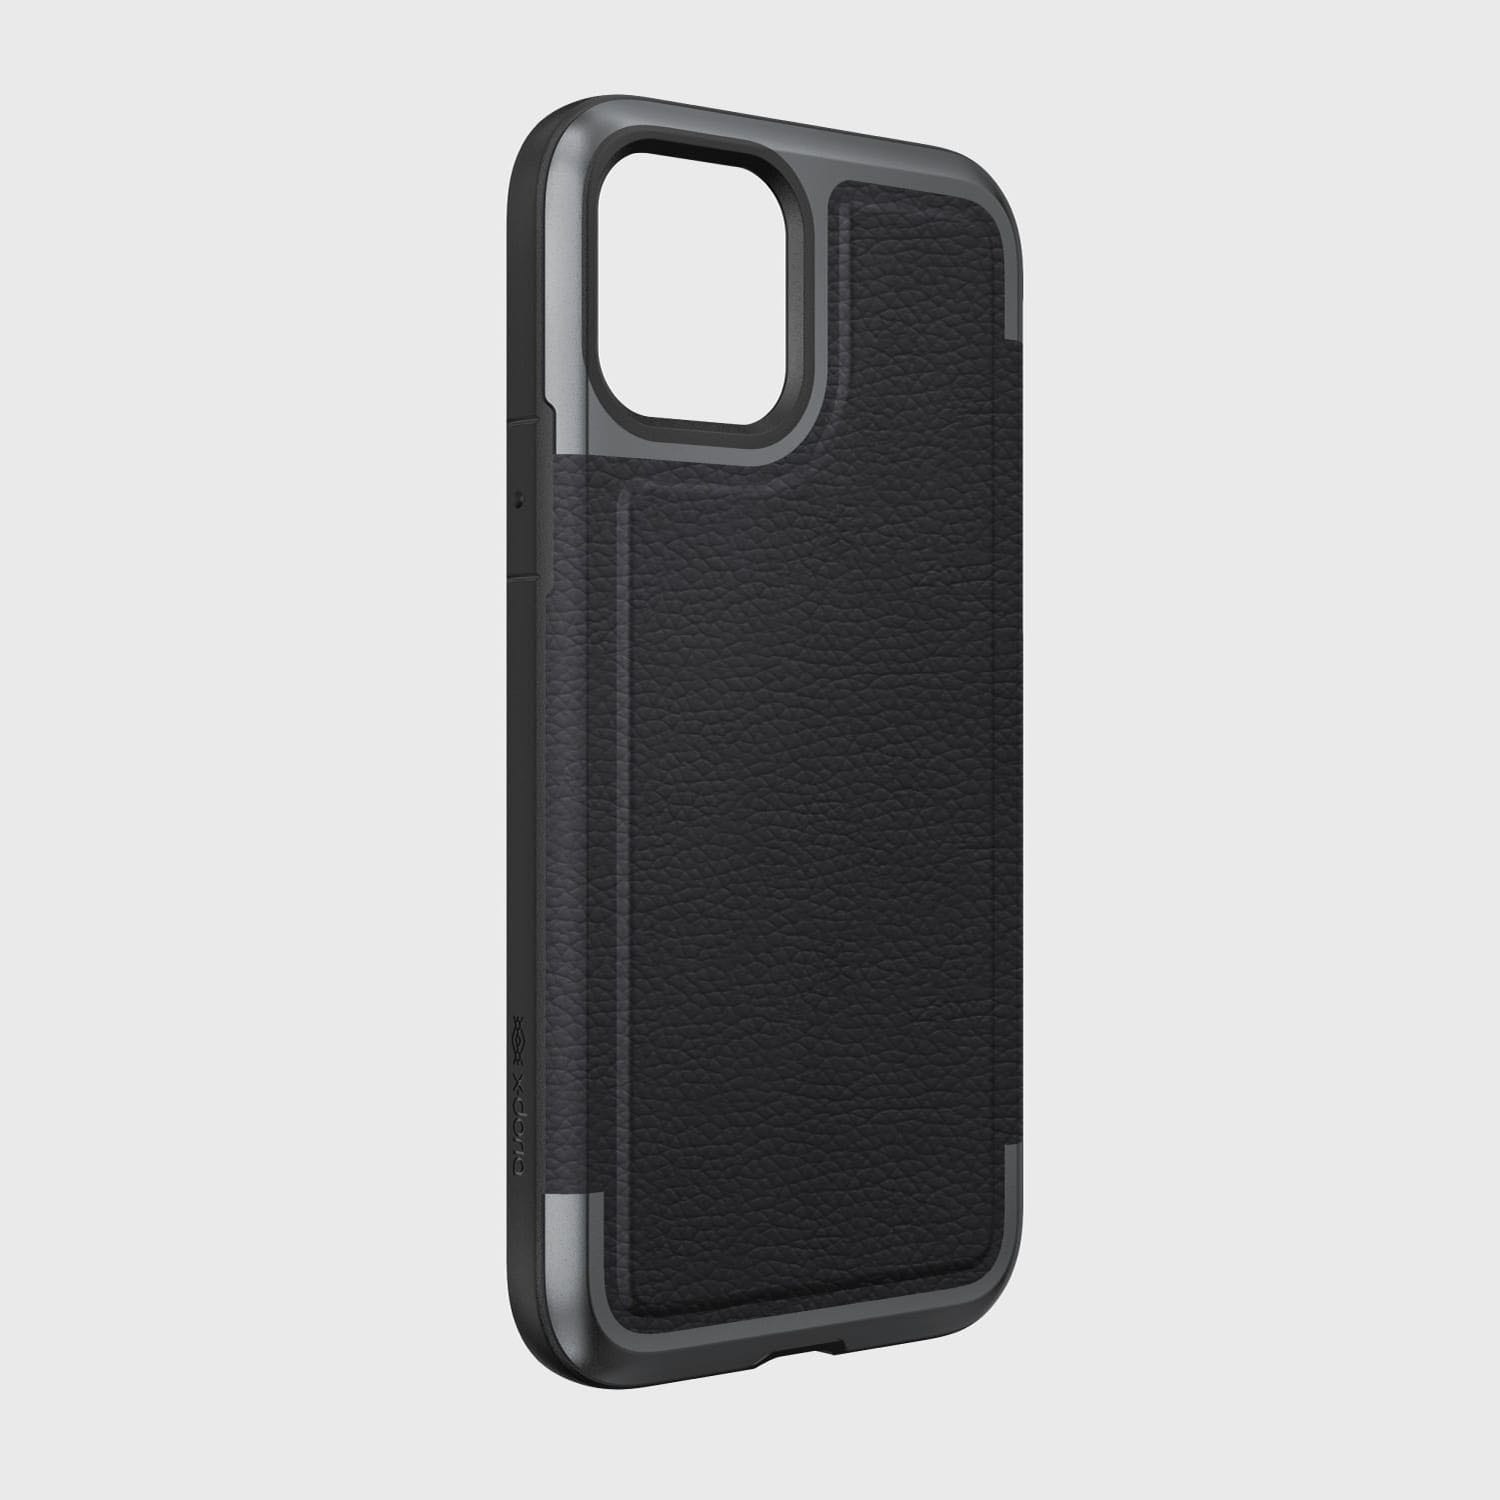 A black leather protective case for the iPhone 11 Pro - Raptic iPhone 11 Pro Case - Prime.